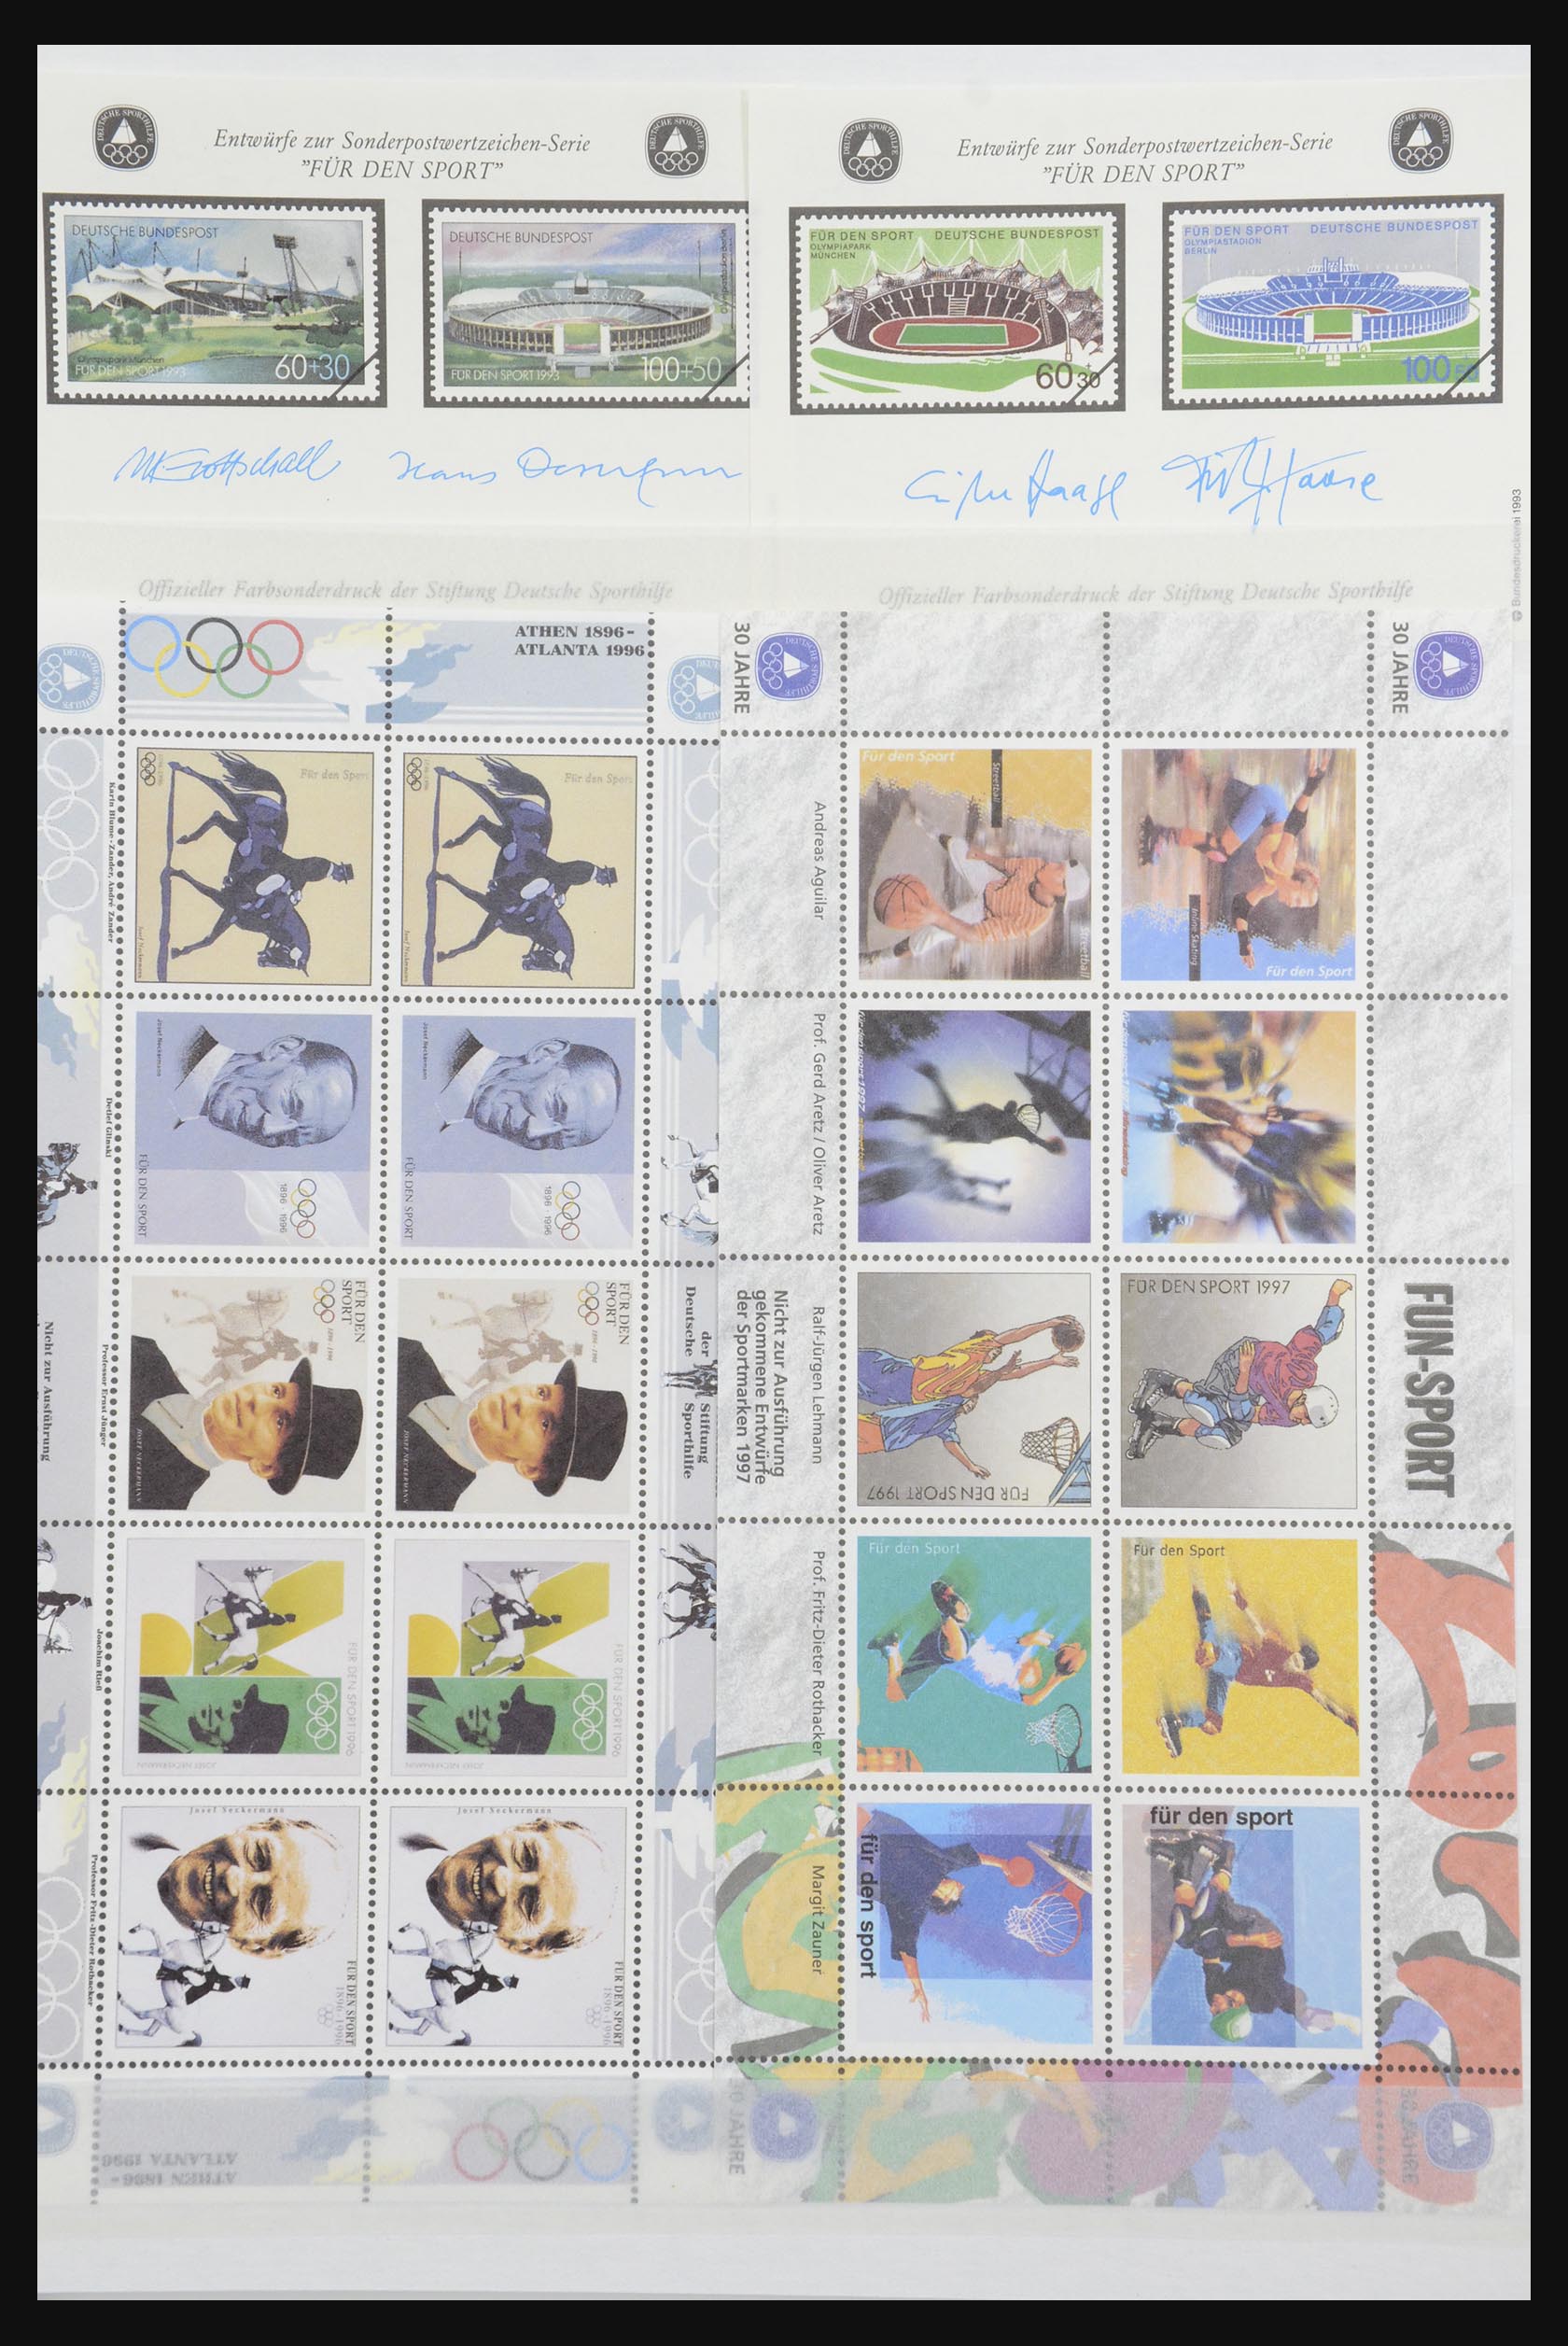 32050 003 - 32050 Bundespost special sheets 1980-2010.